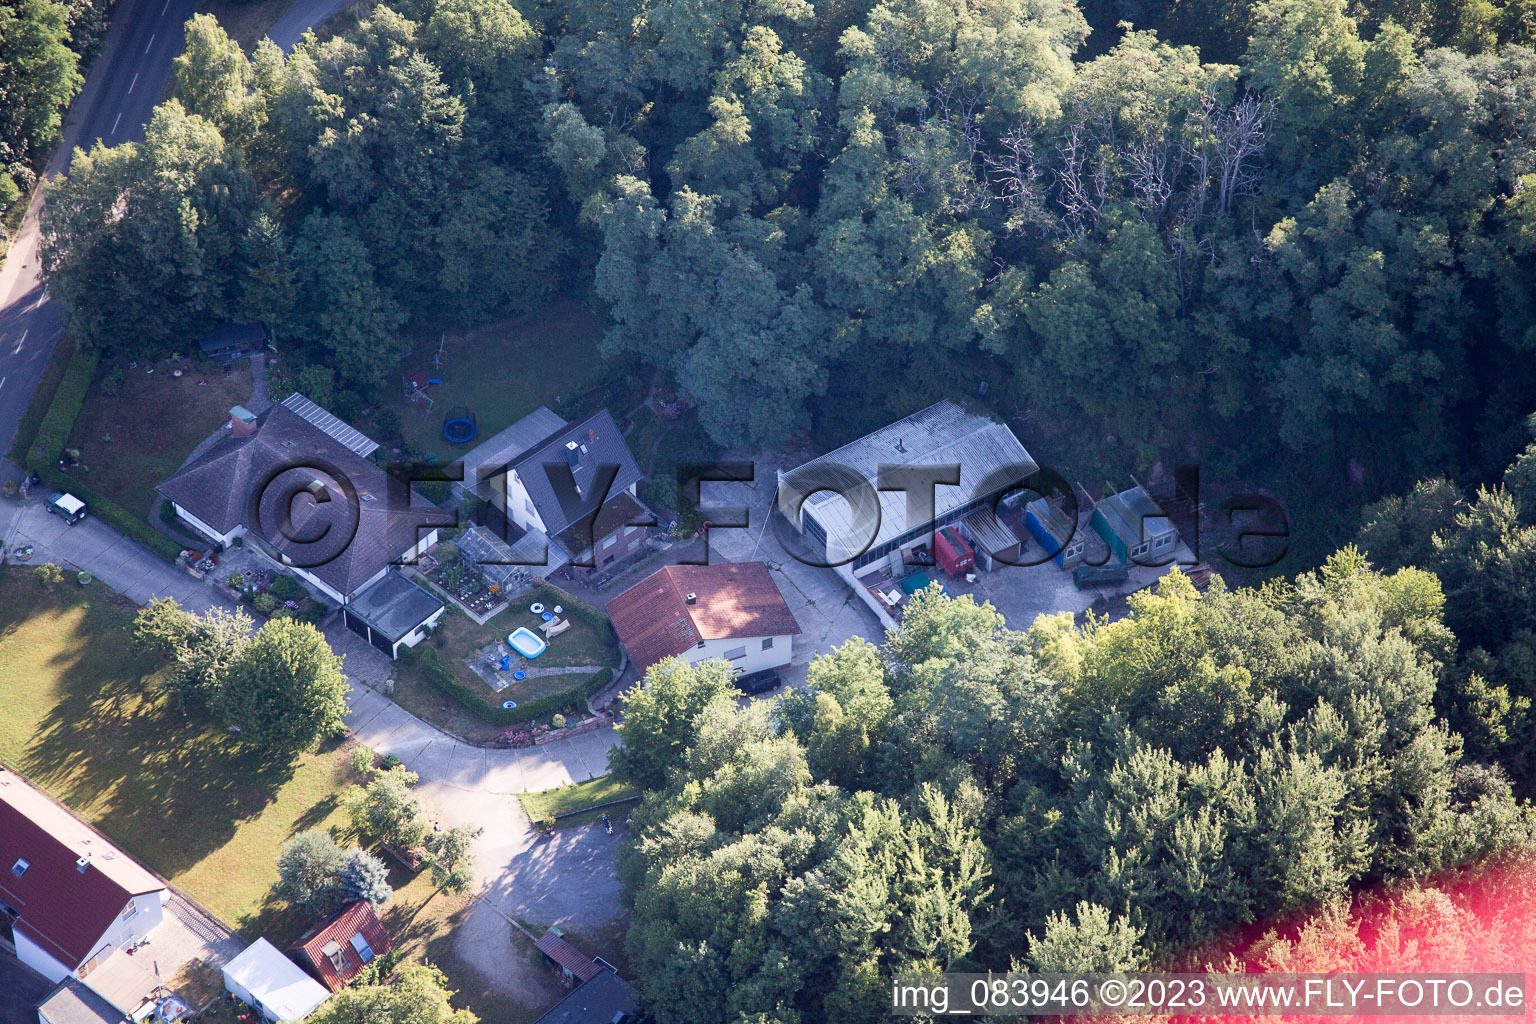 Hohenwettersbacherstraße 38, "open youth workshop Karlsruhe" at the quarry in the district Grünwettersbach in Karlsruhe in the state Baden-Wuerttemberg, Germany seen from above